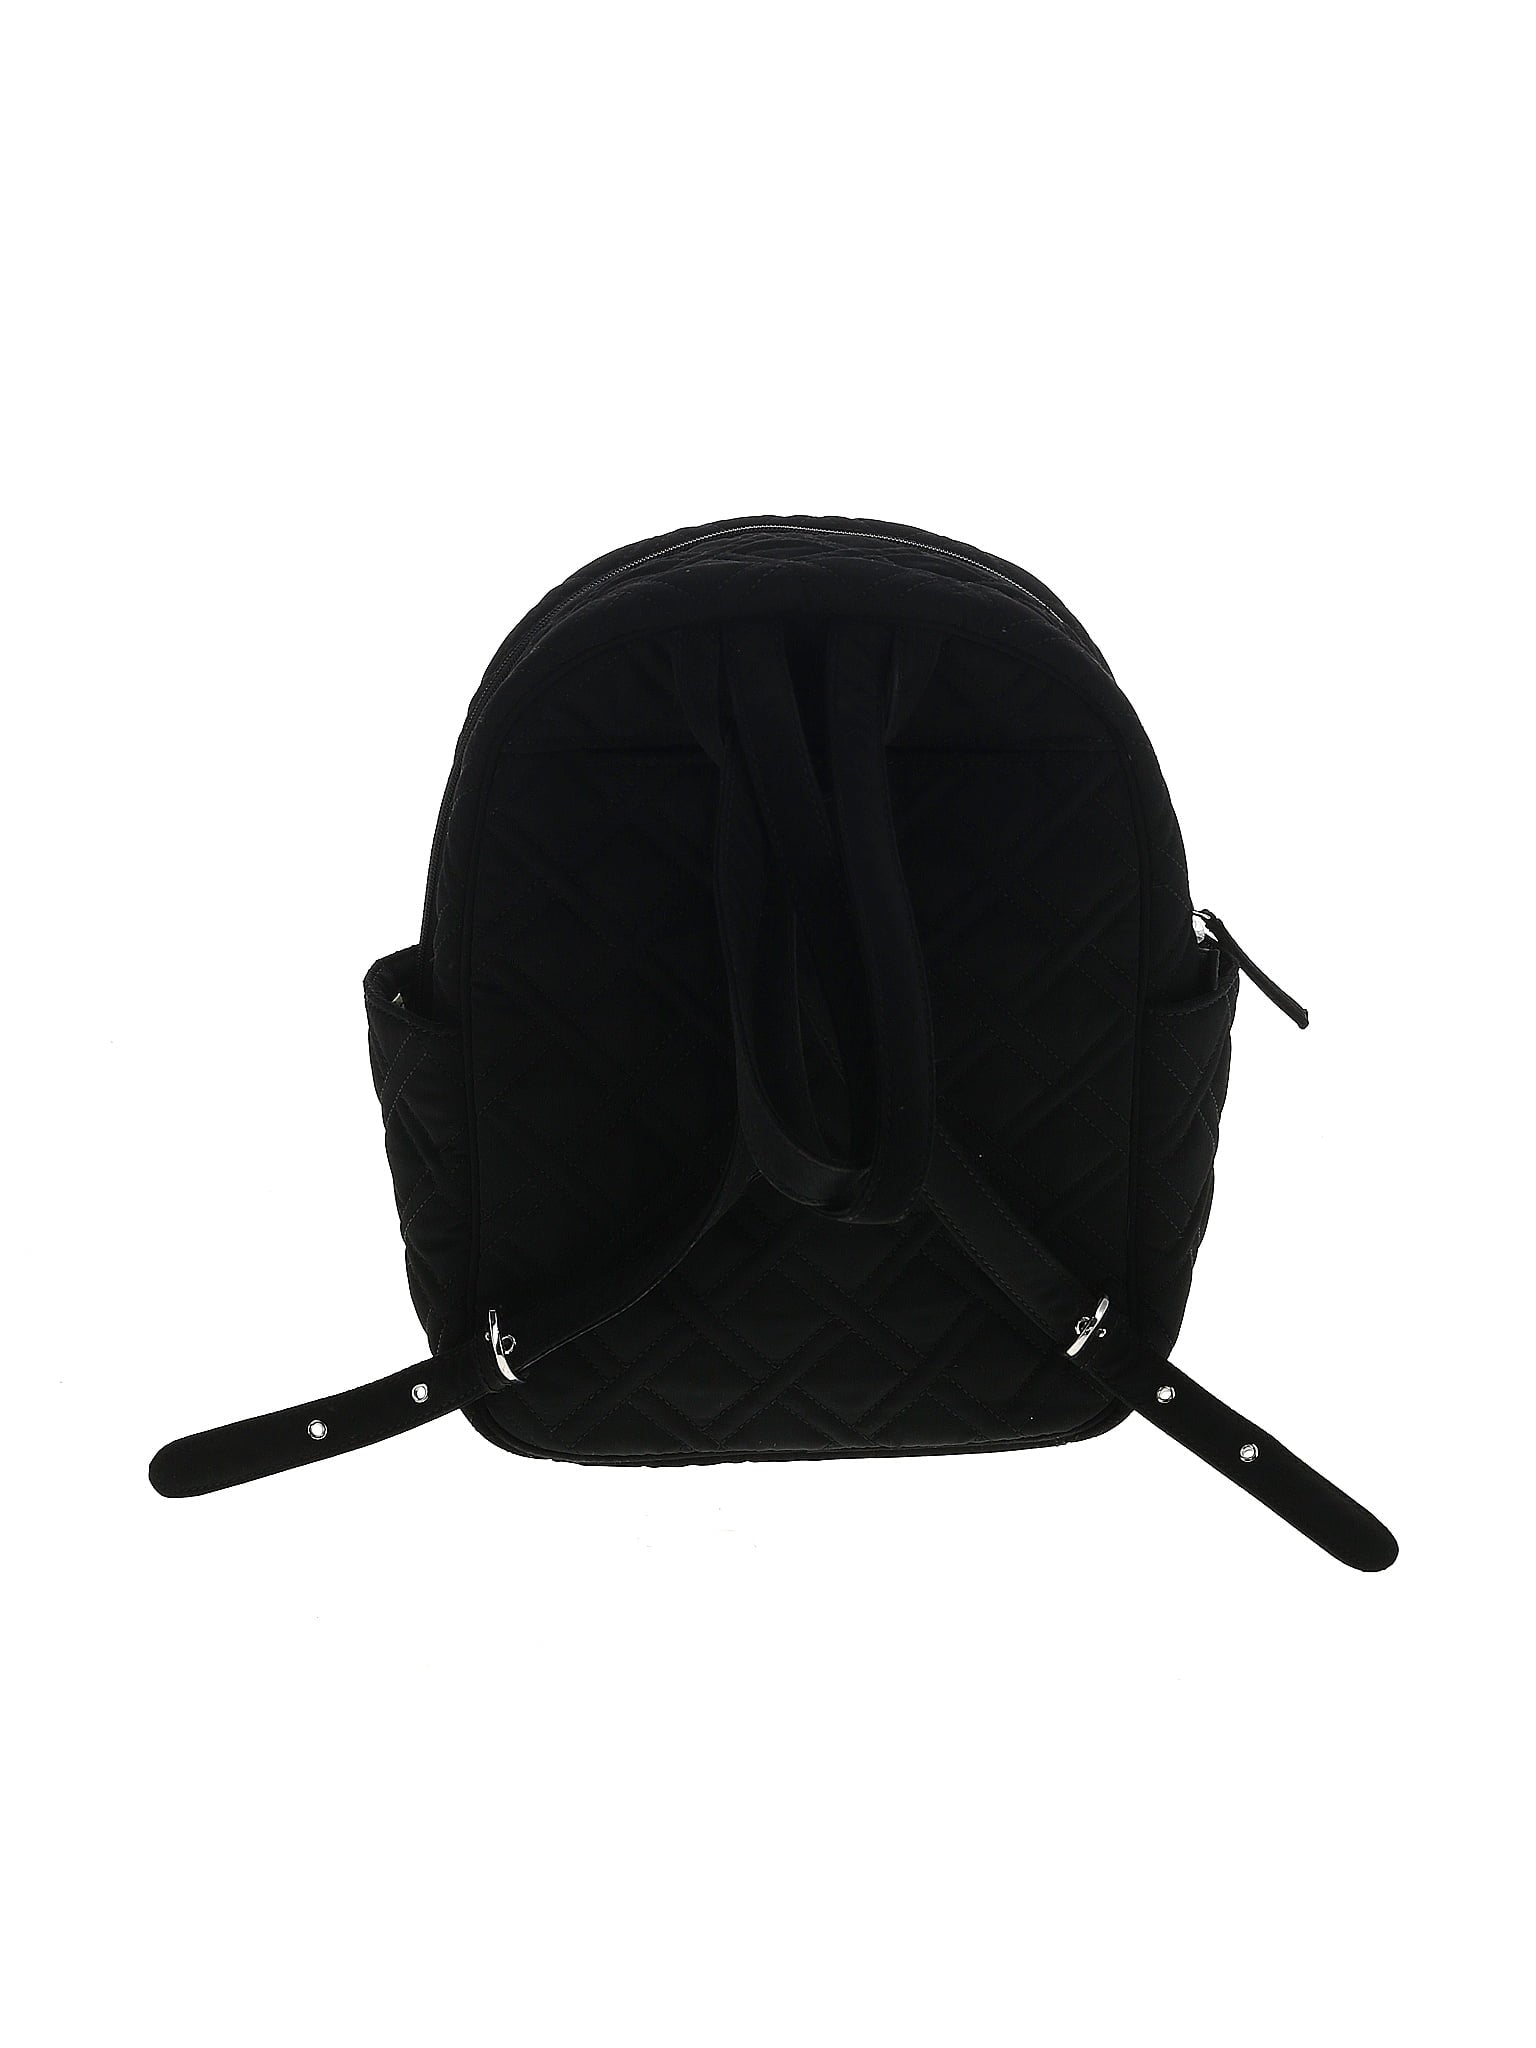 Backpack size - One Size